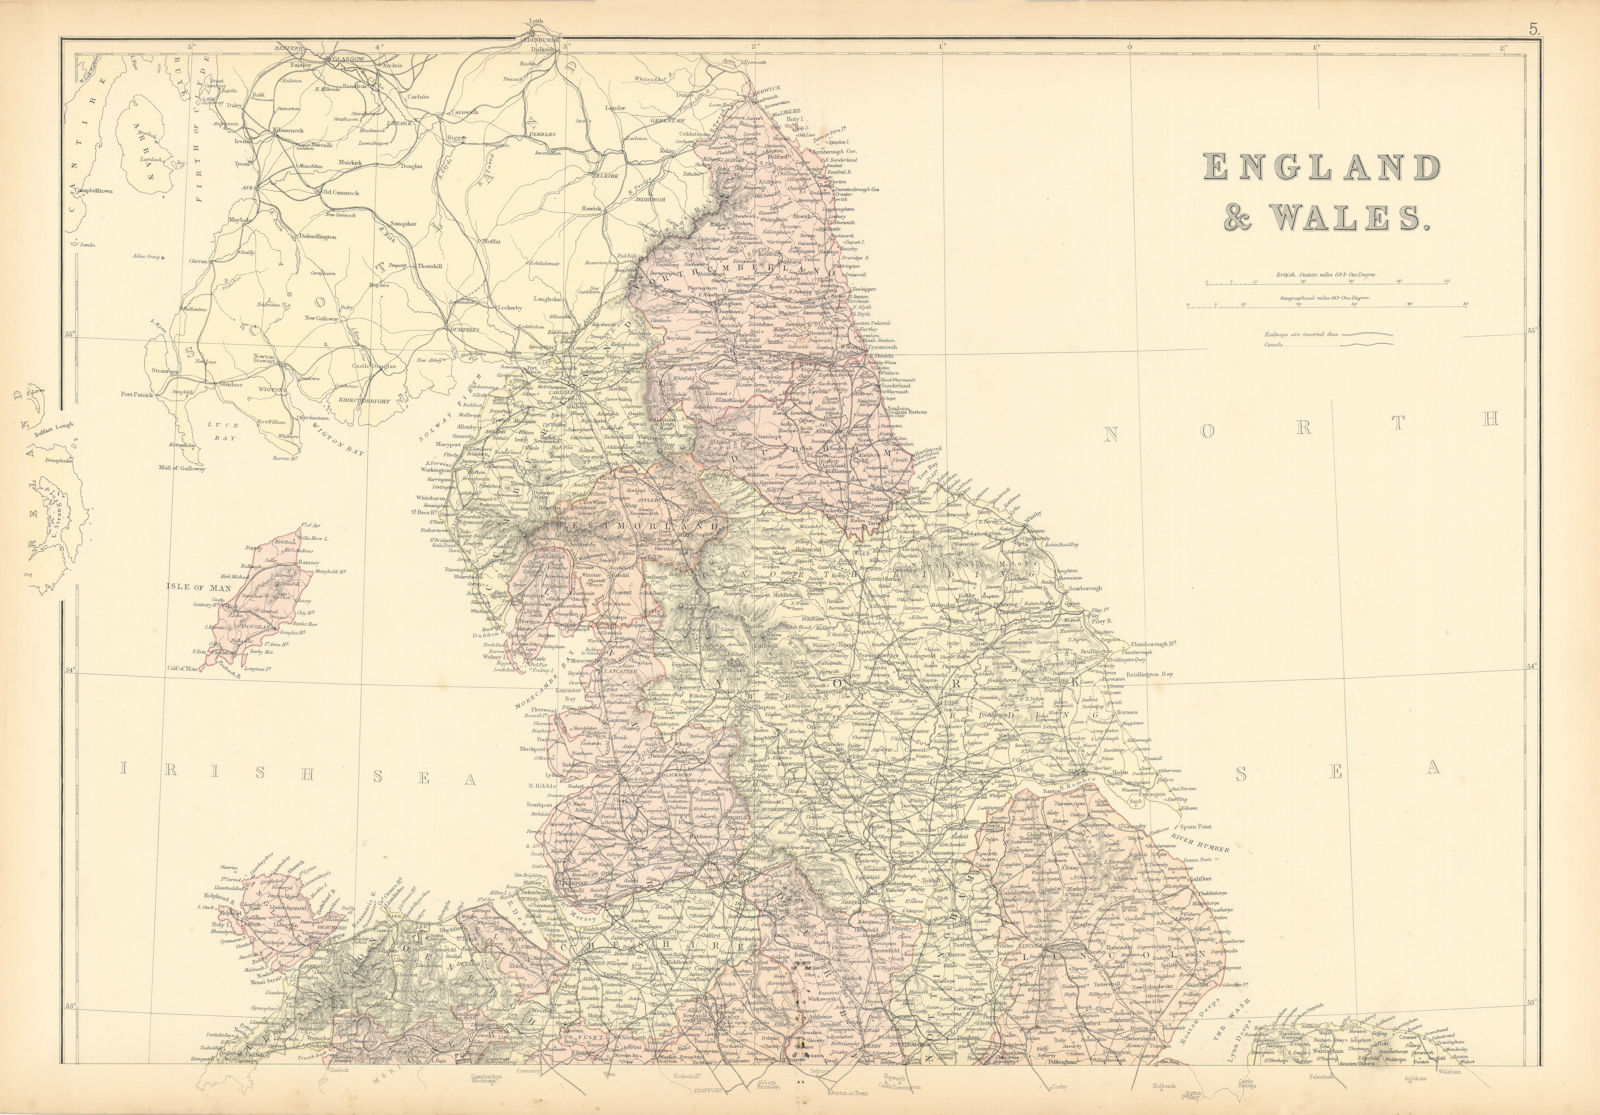 ENGLAND AND WALES NORTH. Counties & railways. Westmoreland. BLACKIE 1886 map